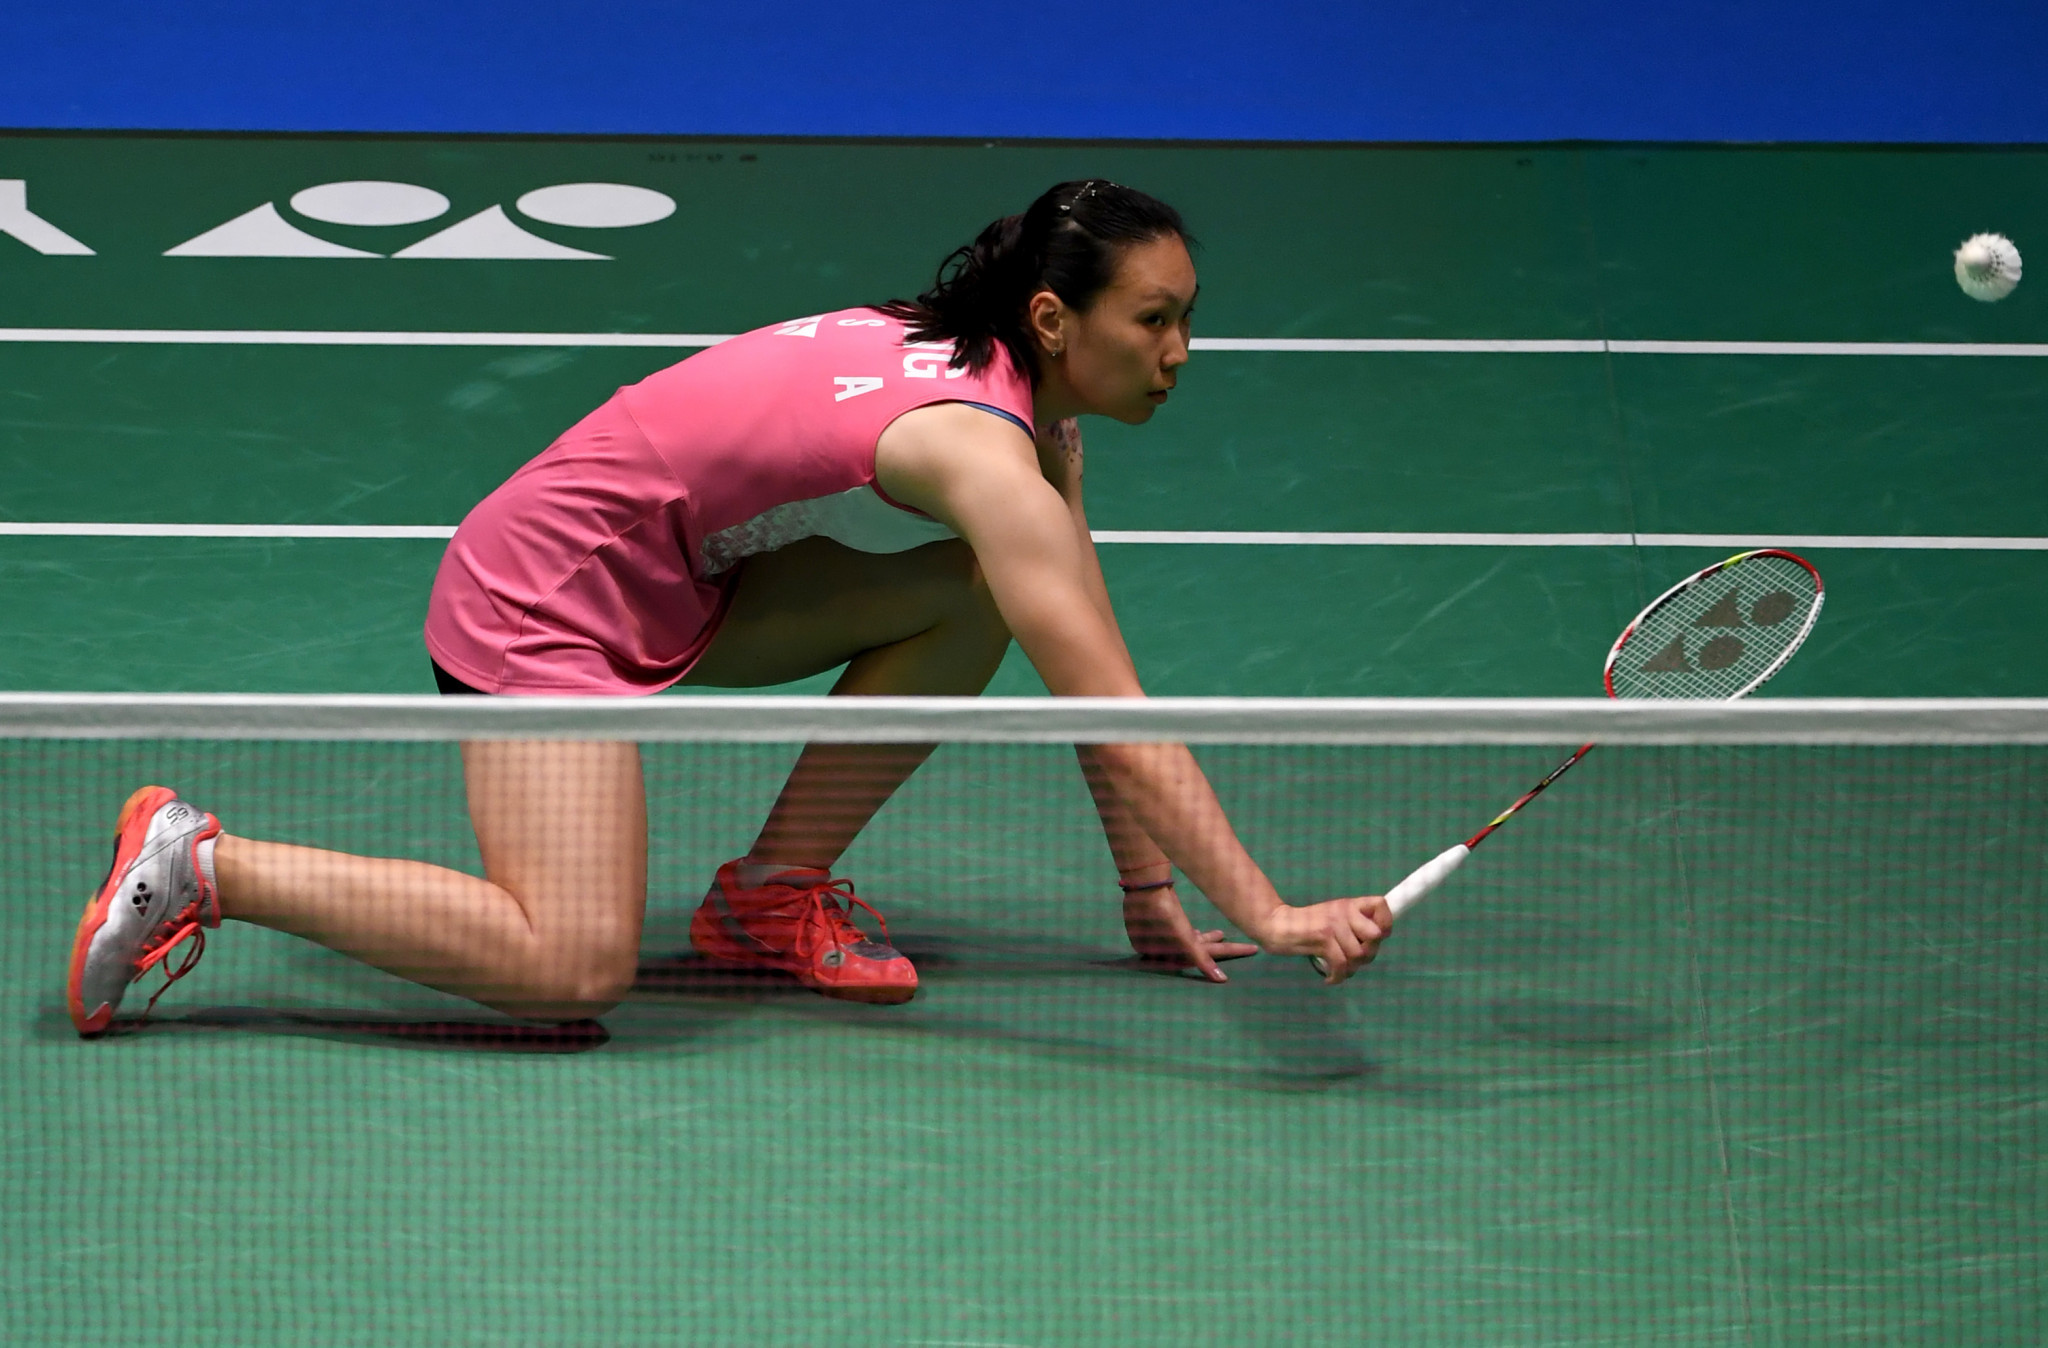 Top seed Zhang eases through to second round at BWF Dutch Open